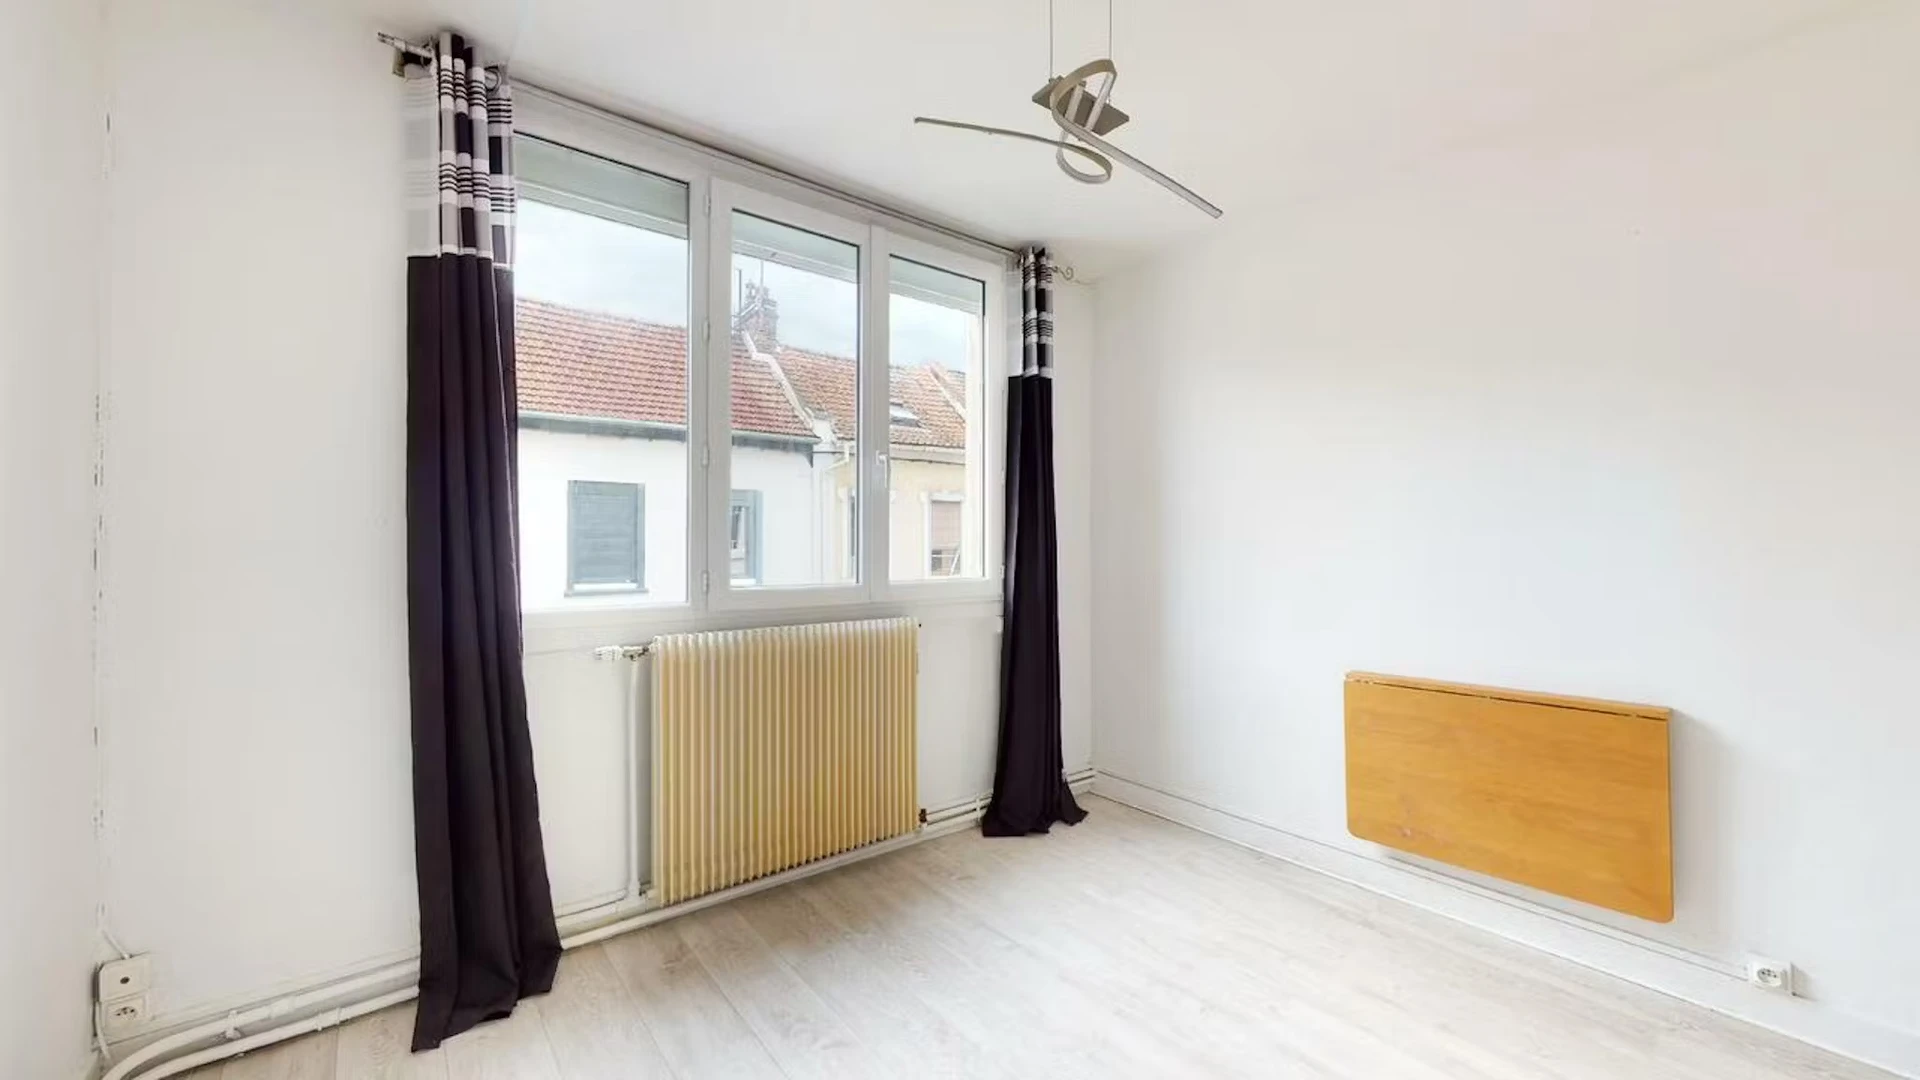 Accommodation with 3 bedrooms in Amiens